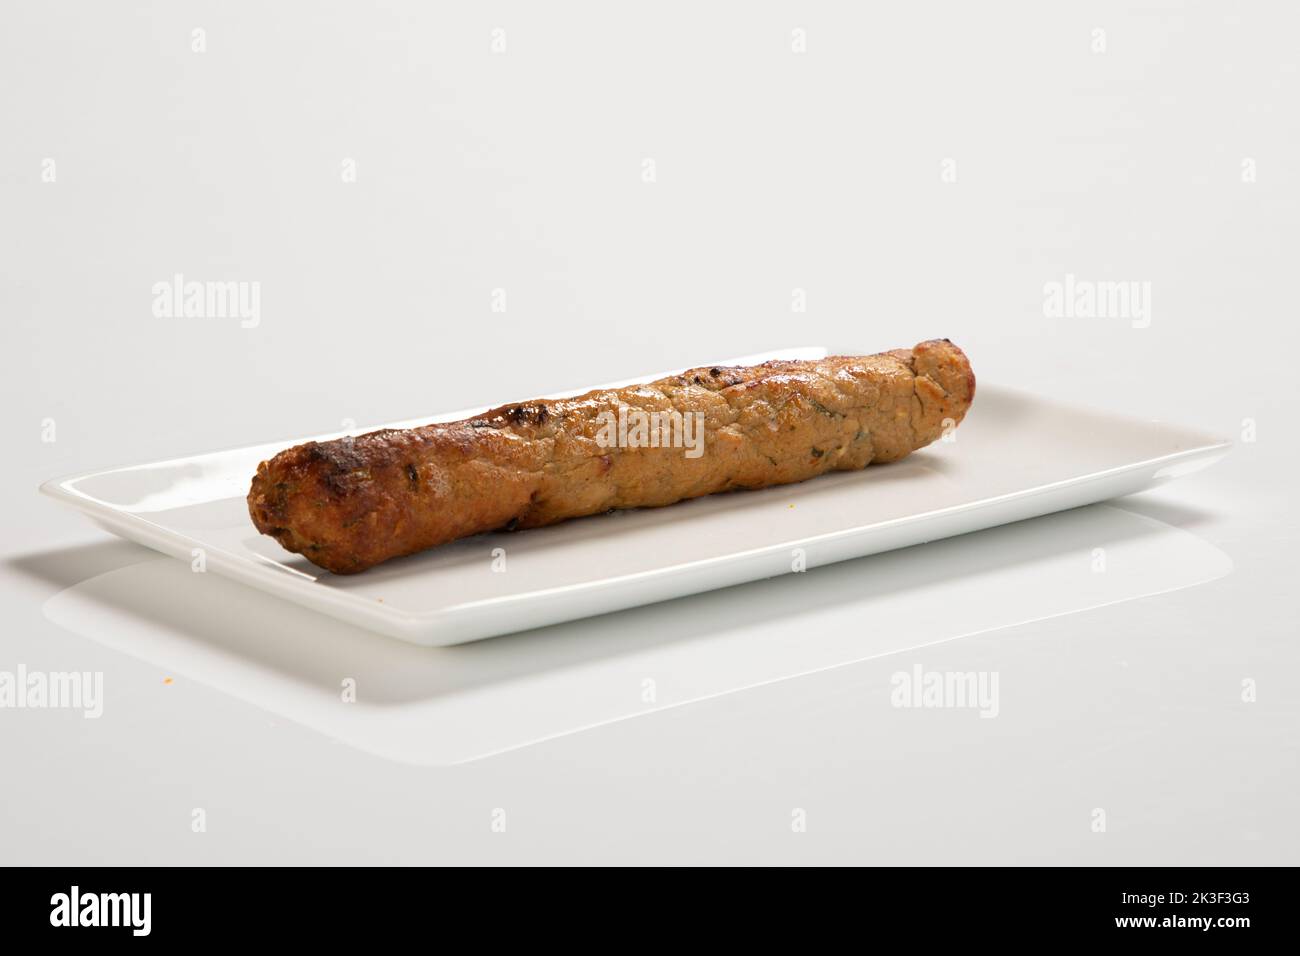 Seekh Kabab made with minced chicken or Mutton keema, served with green chutney and salad Stock Photo